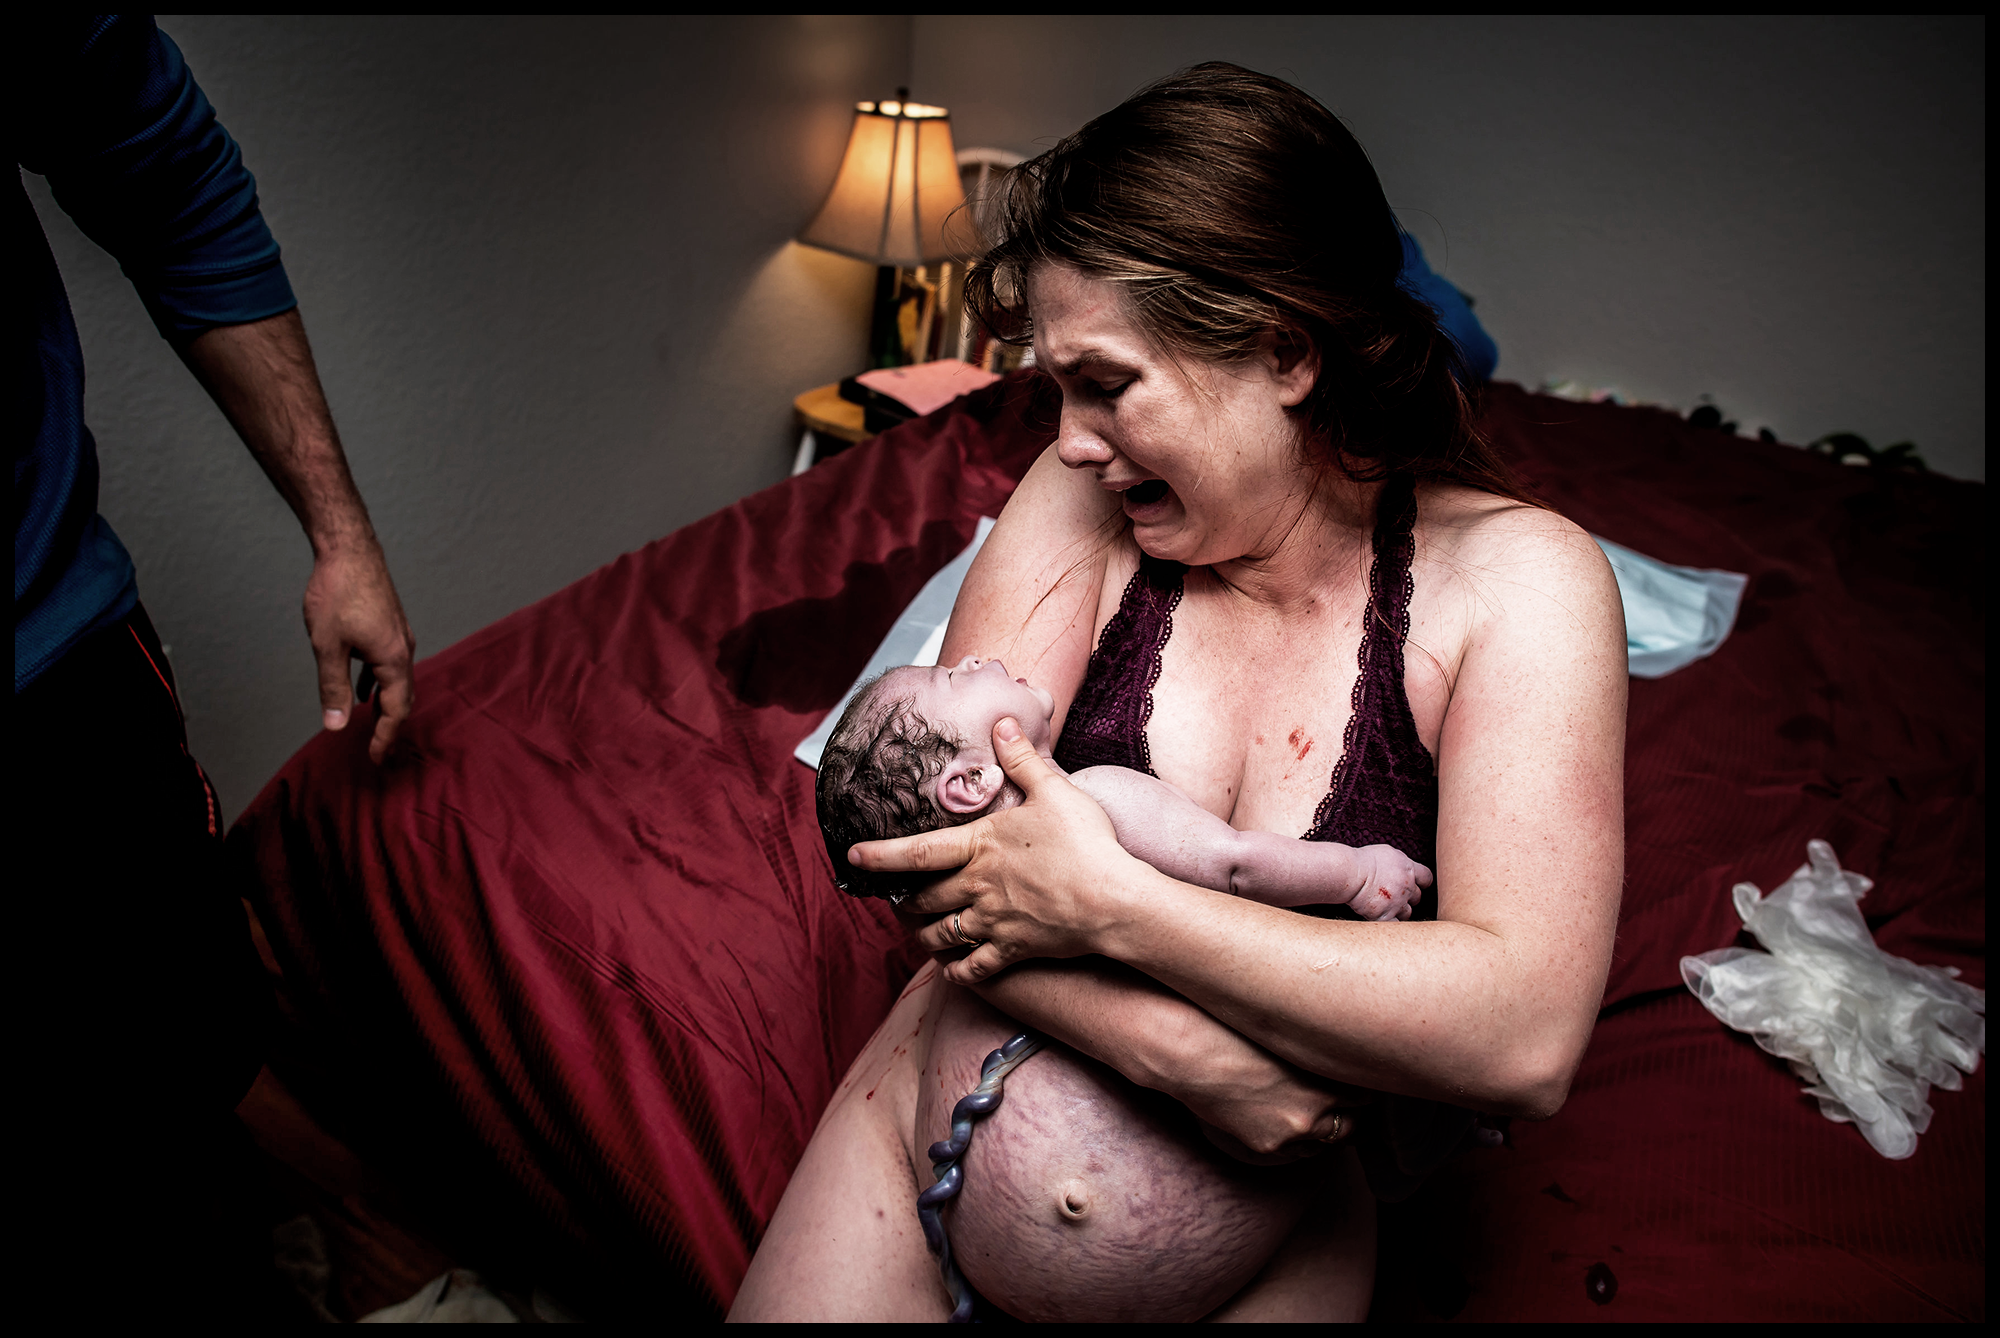 Nude Pregnant Pussy Giving Birth - Empowered Birth Project Fights Childbirth Photos Being Censored on Instagram